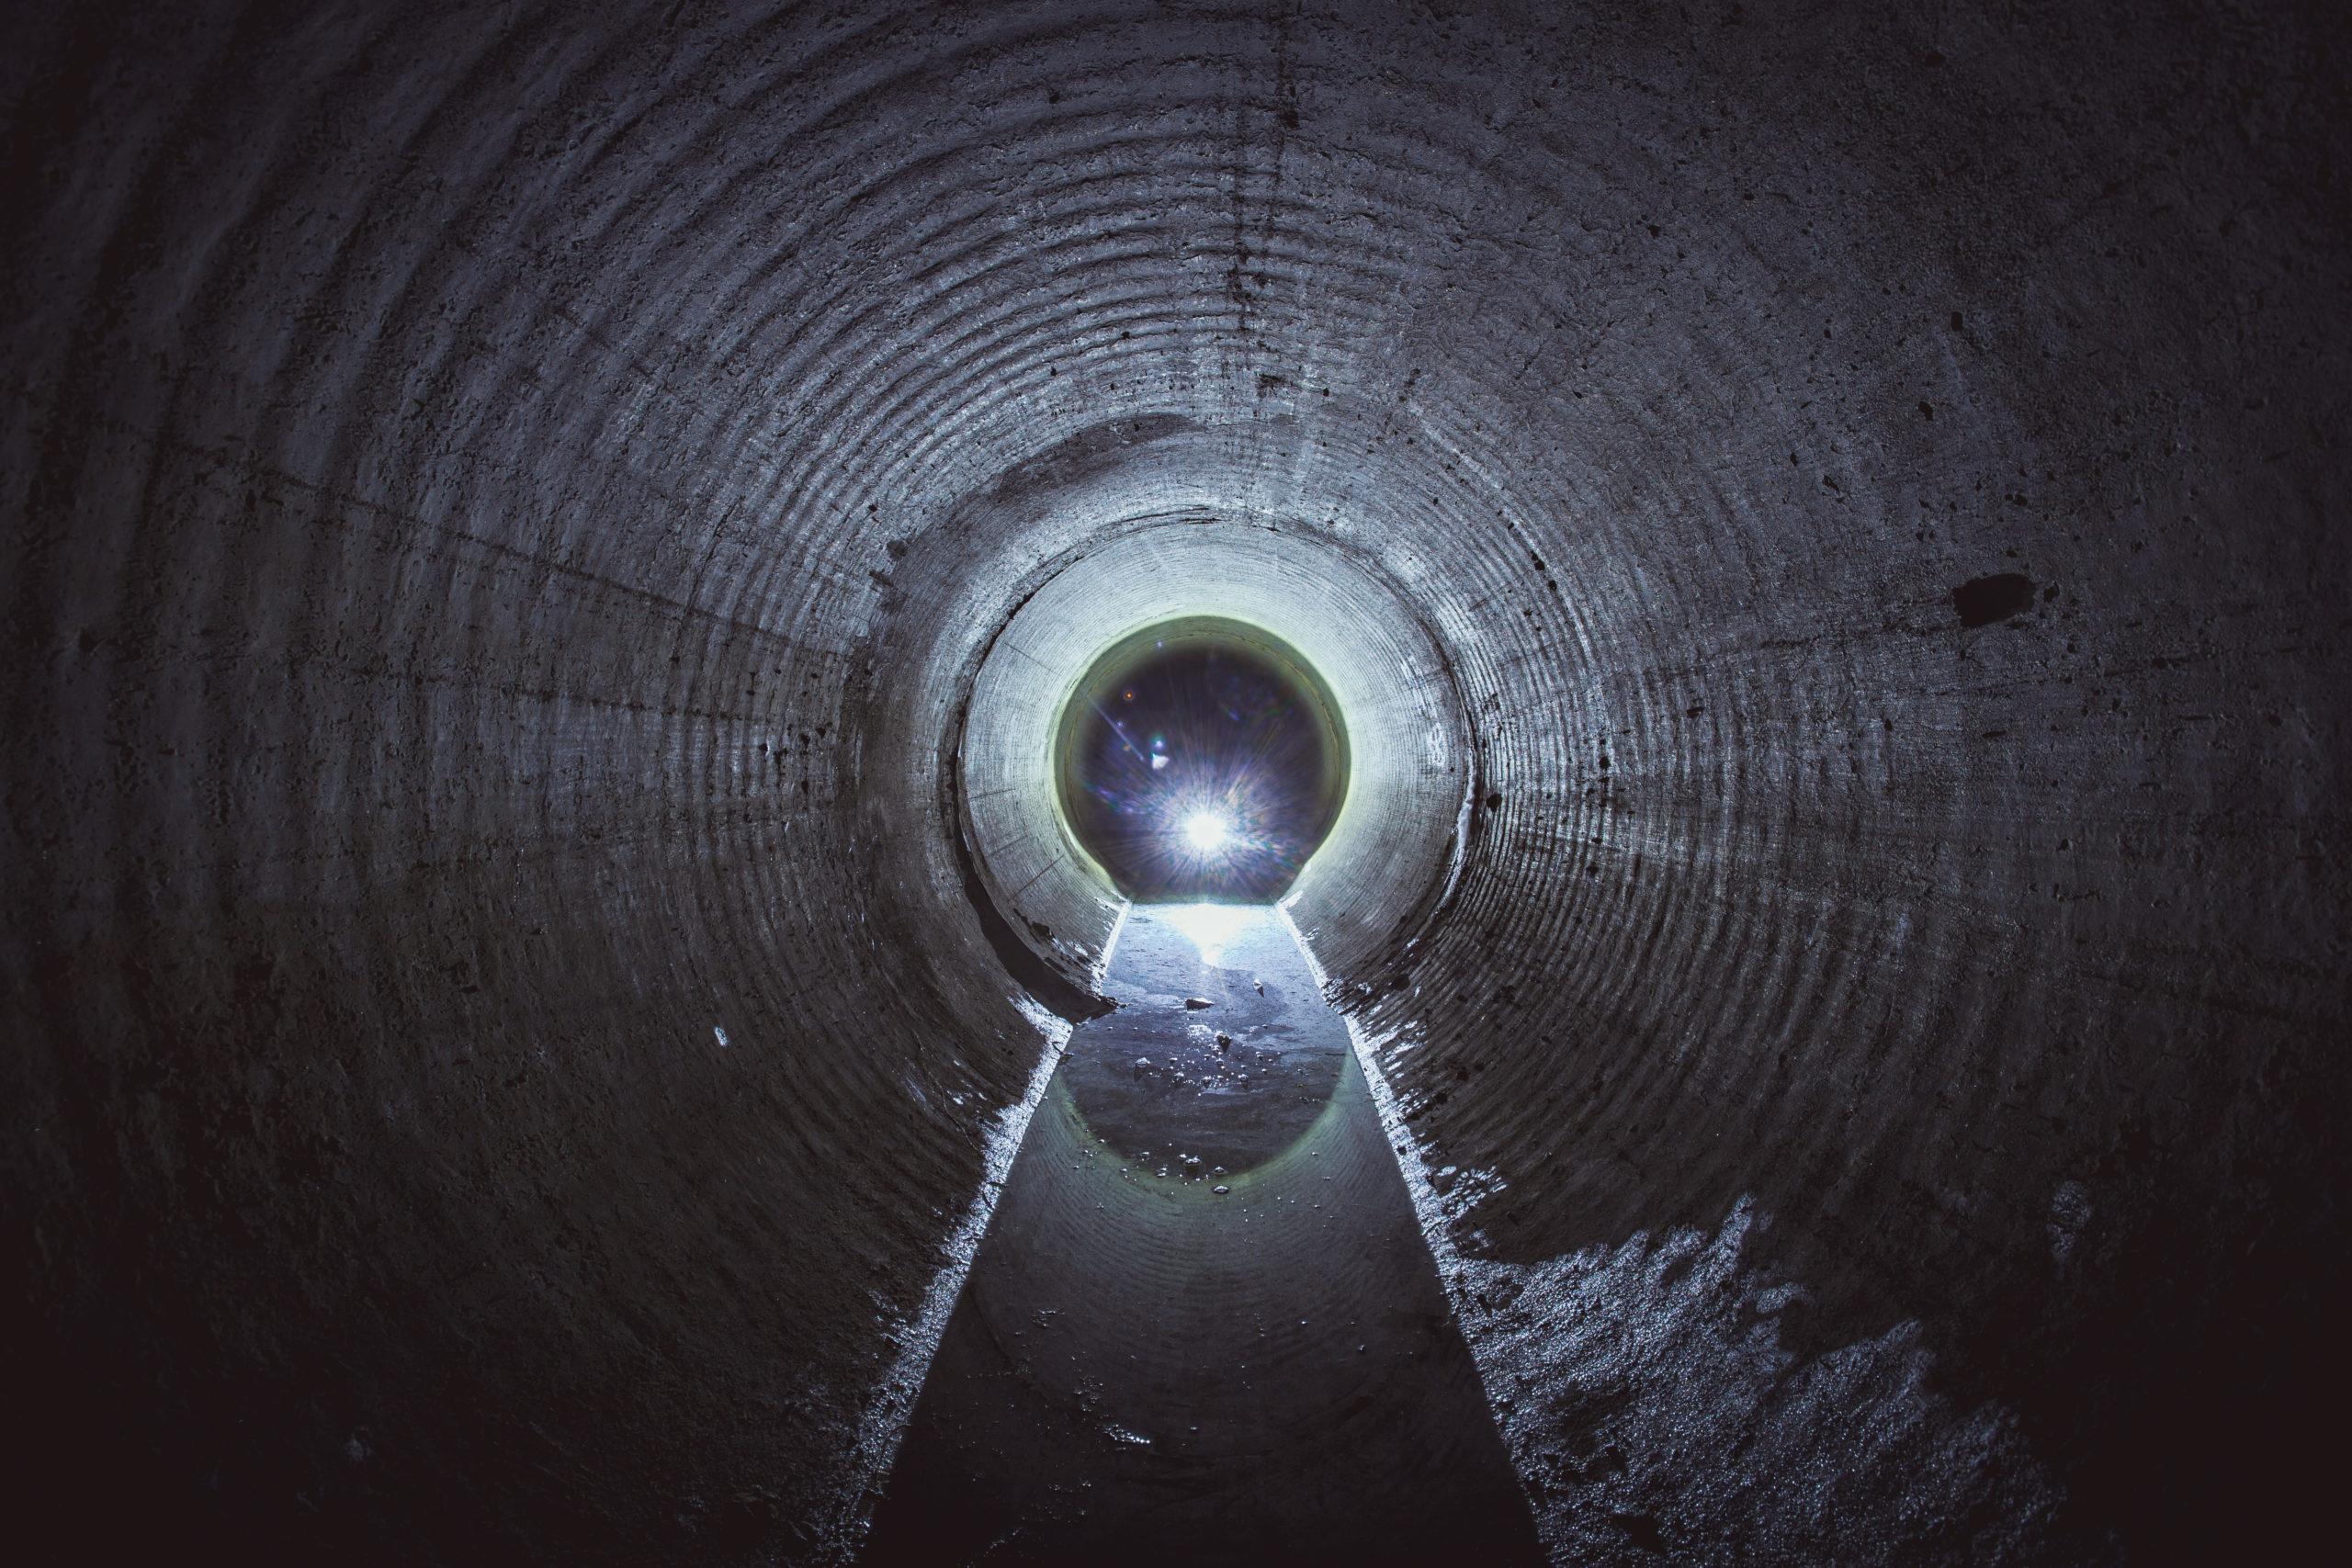 Flooded round underground drainage sewer tunnel with dirty sewage water